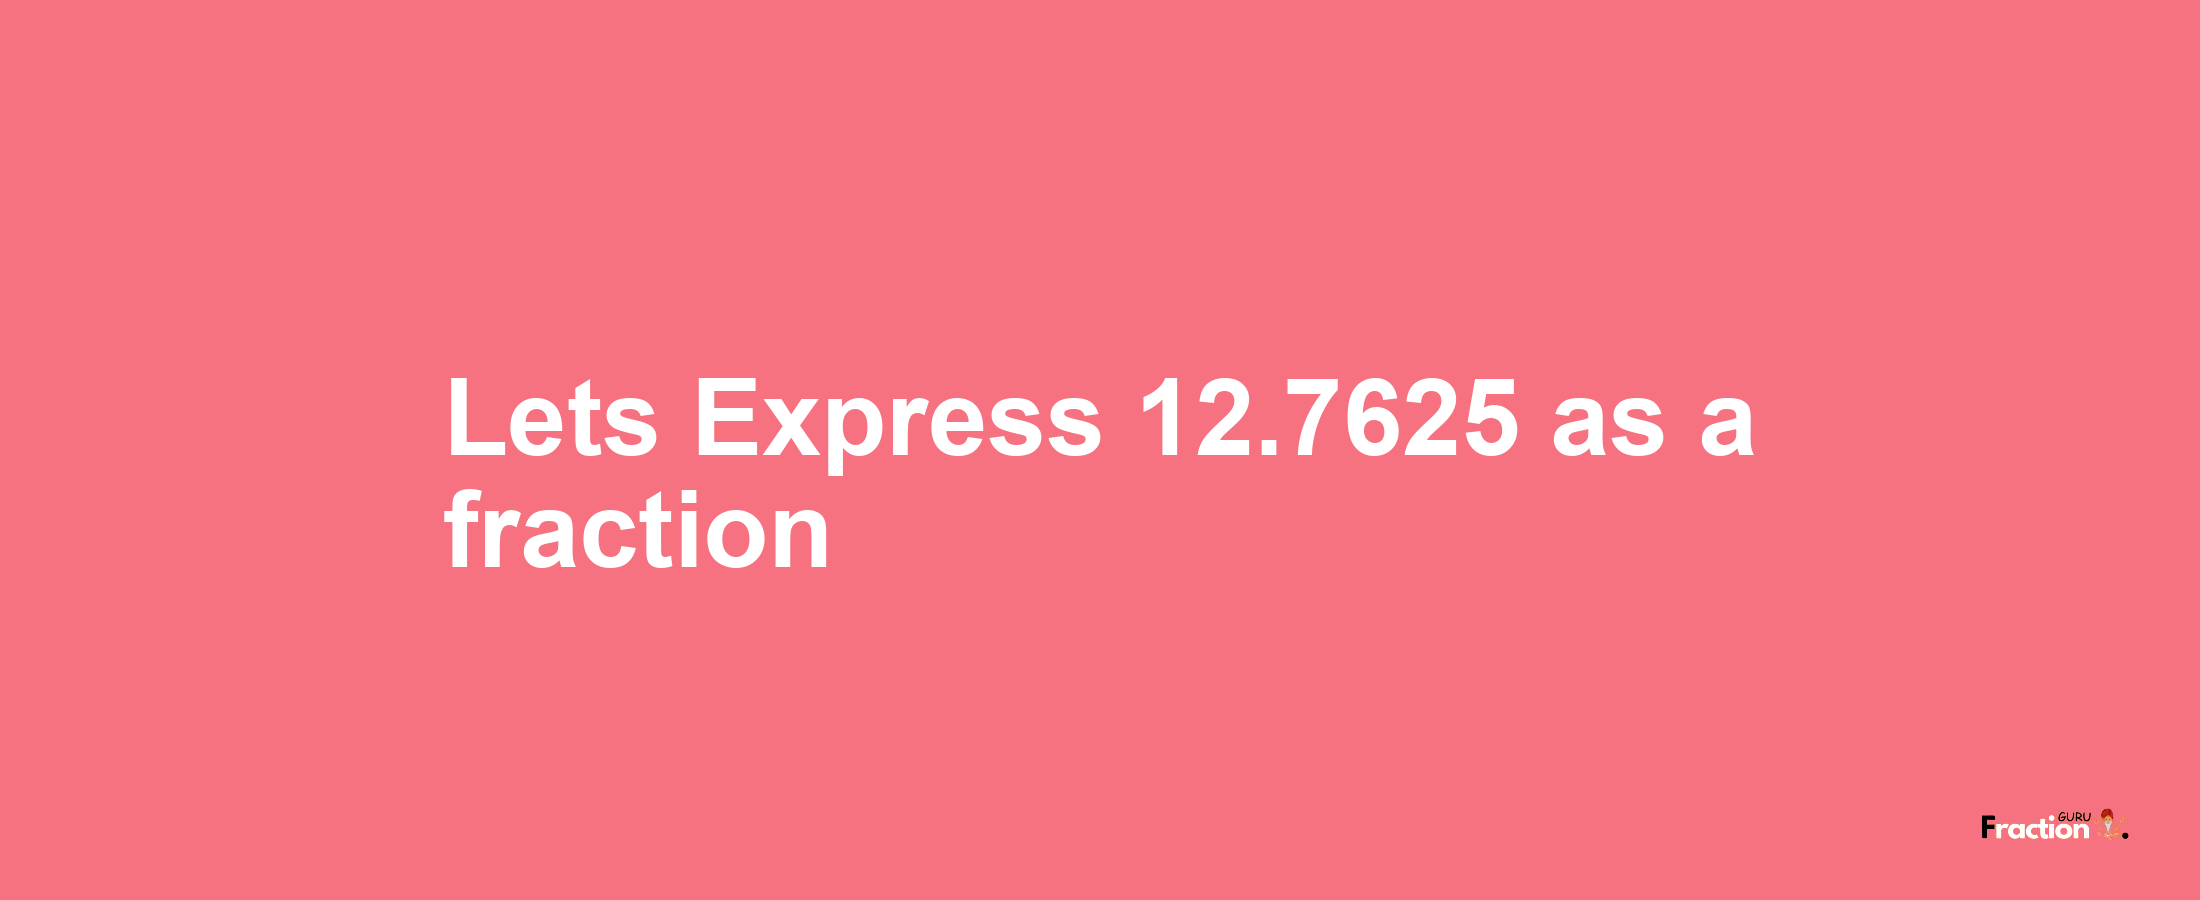 Lets Express 12.7625 as afraction